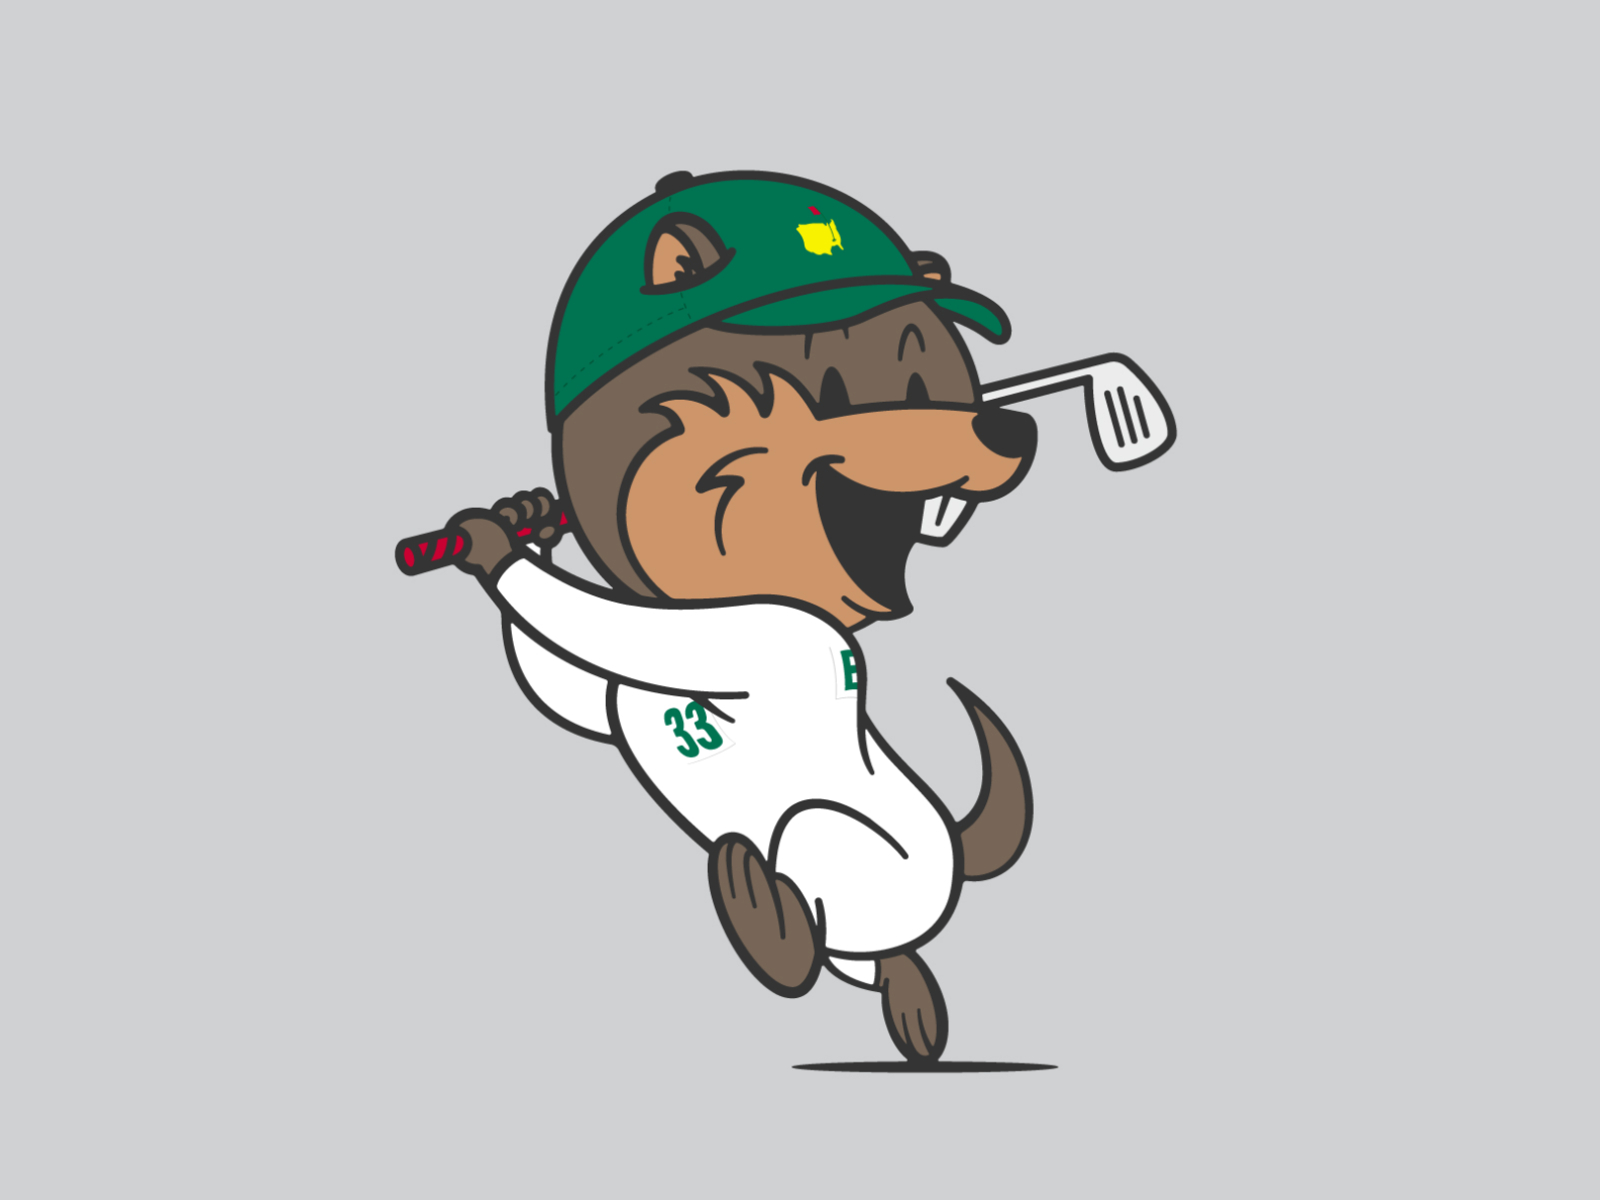 Masters Bob the masters ed and co edward and co illustration golf gopher mascot